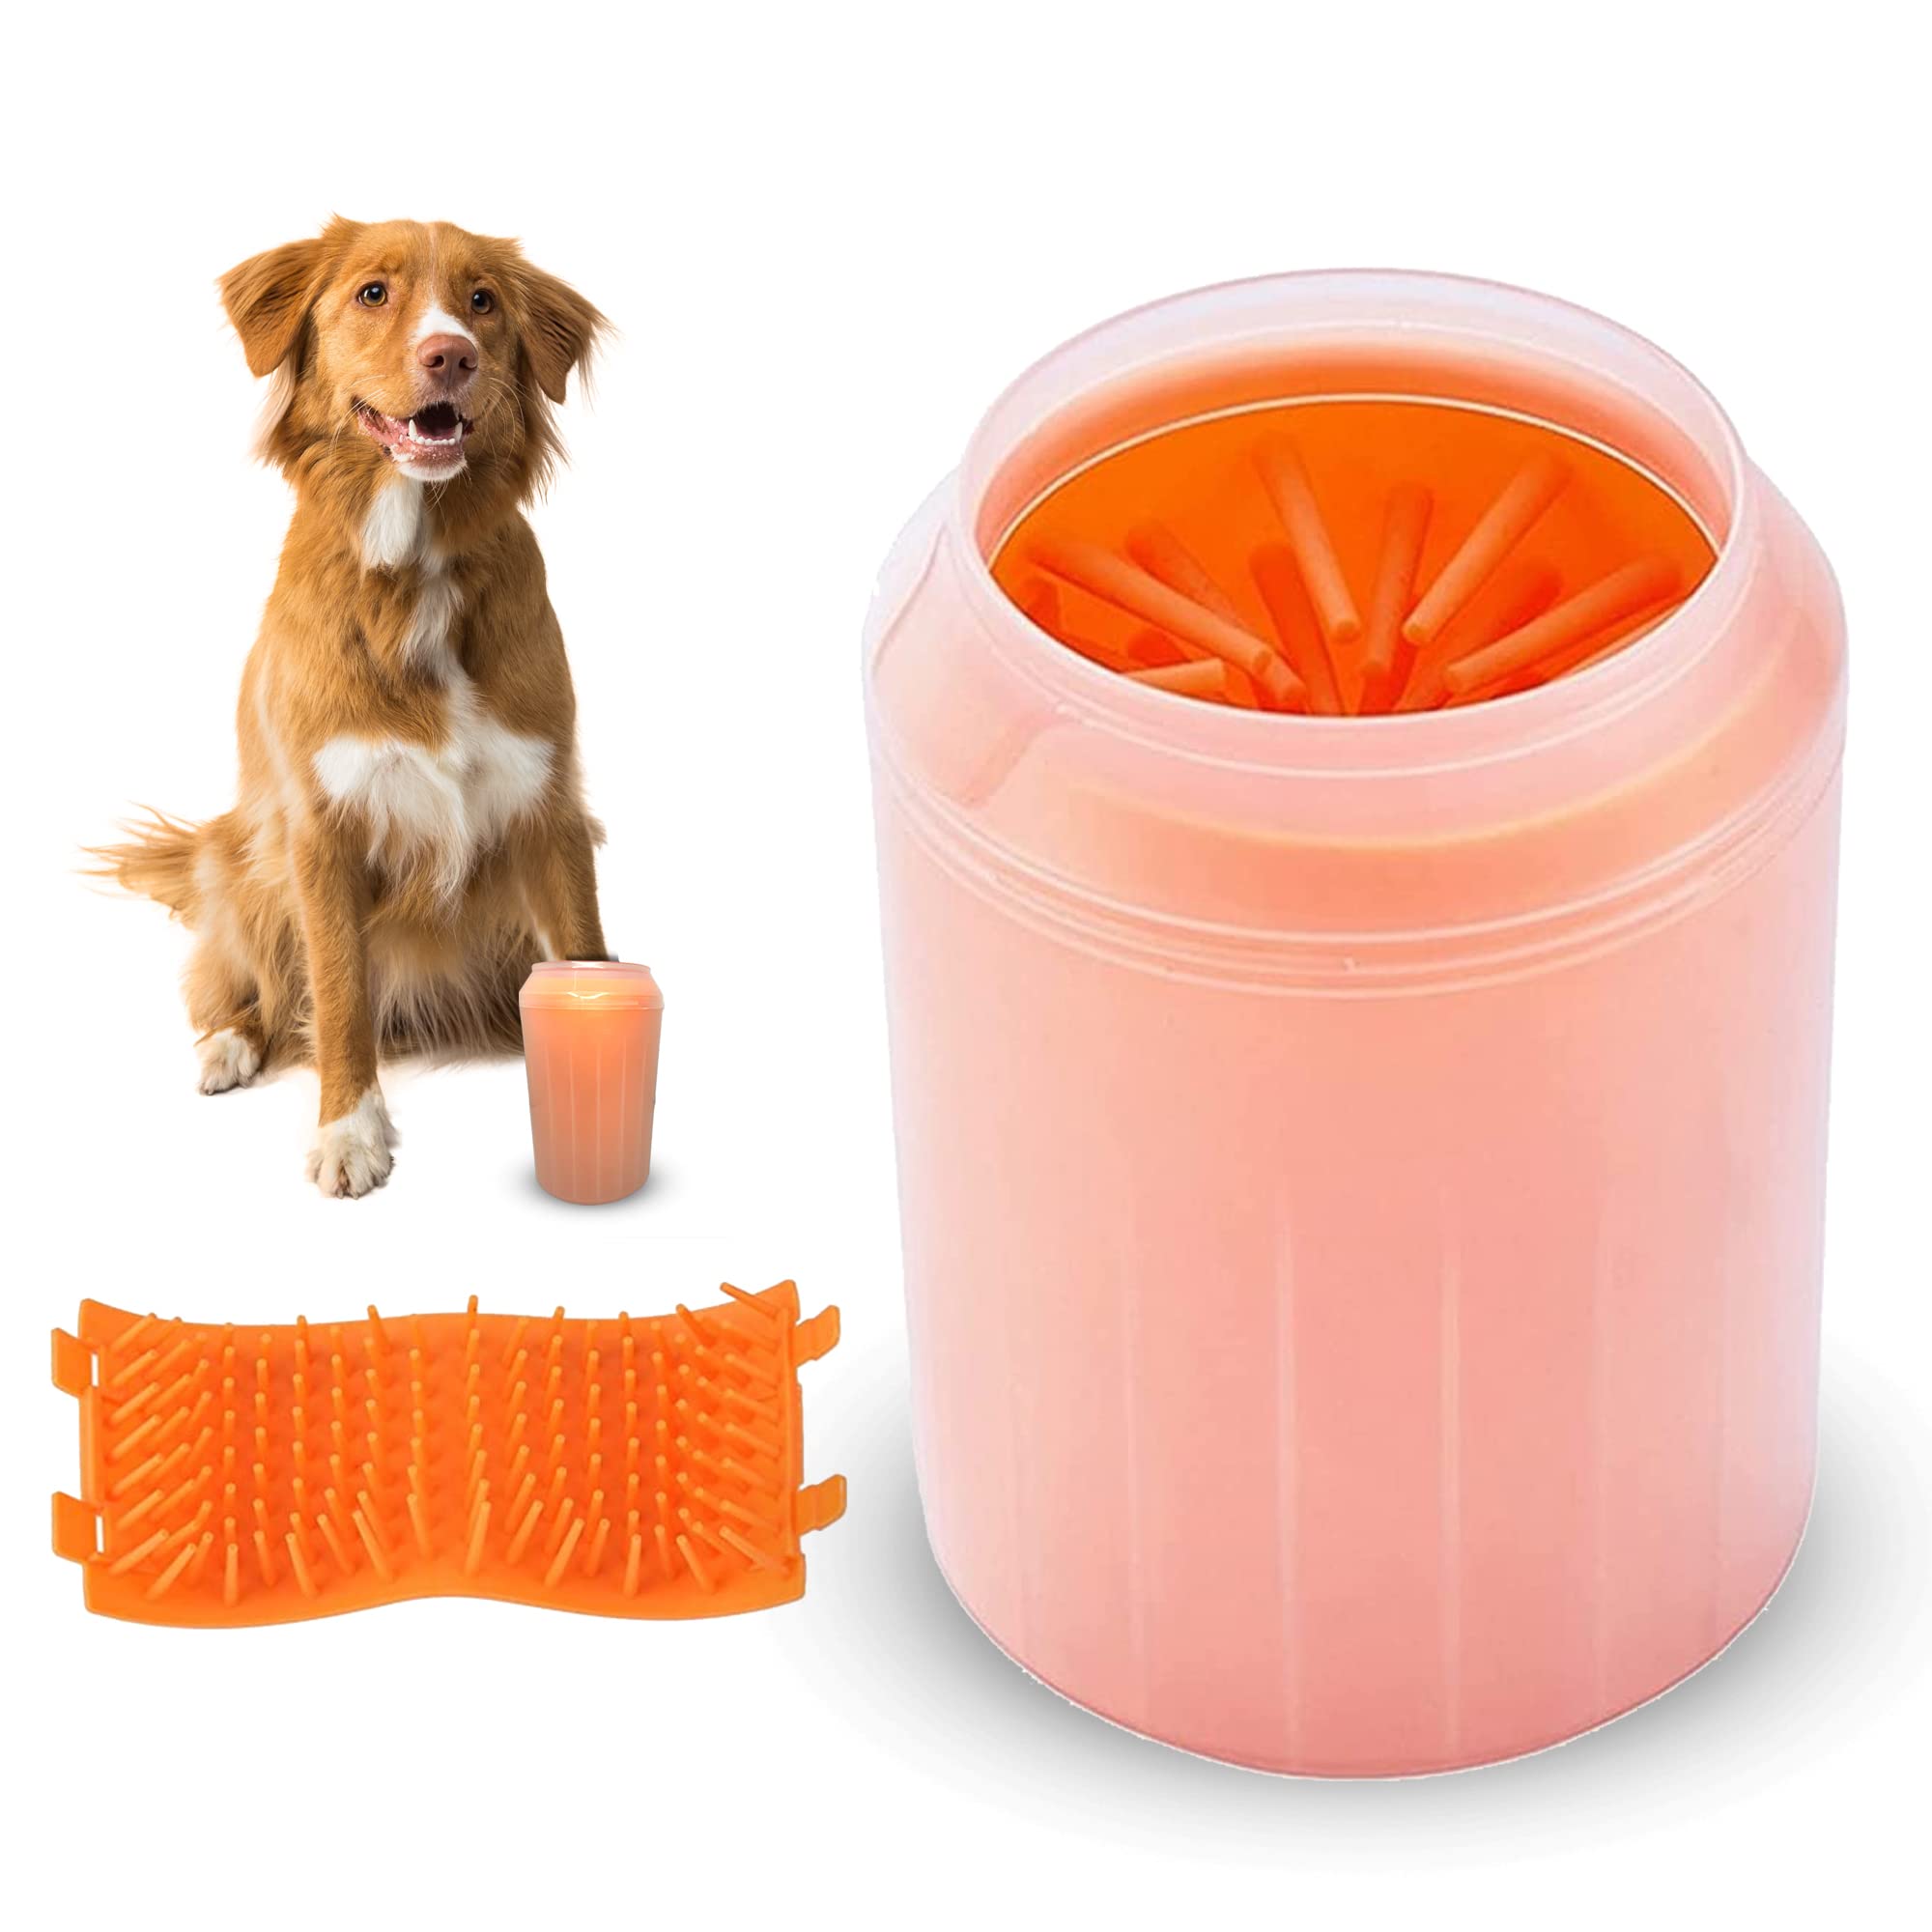 Paw Cleaner for Dogs Large Pet Foot Washer Cup 2 In 1 Portable Silicone Scrubber Brush Feet Large Breed Muddy Paw New Dog Essentials Doggie Owner Gifts Pet Gifts Owner